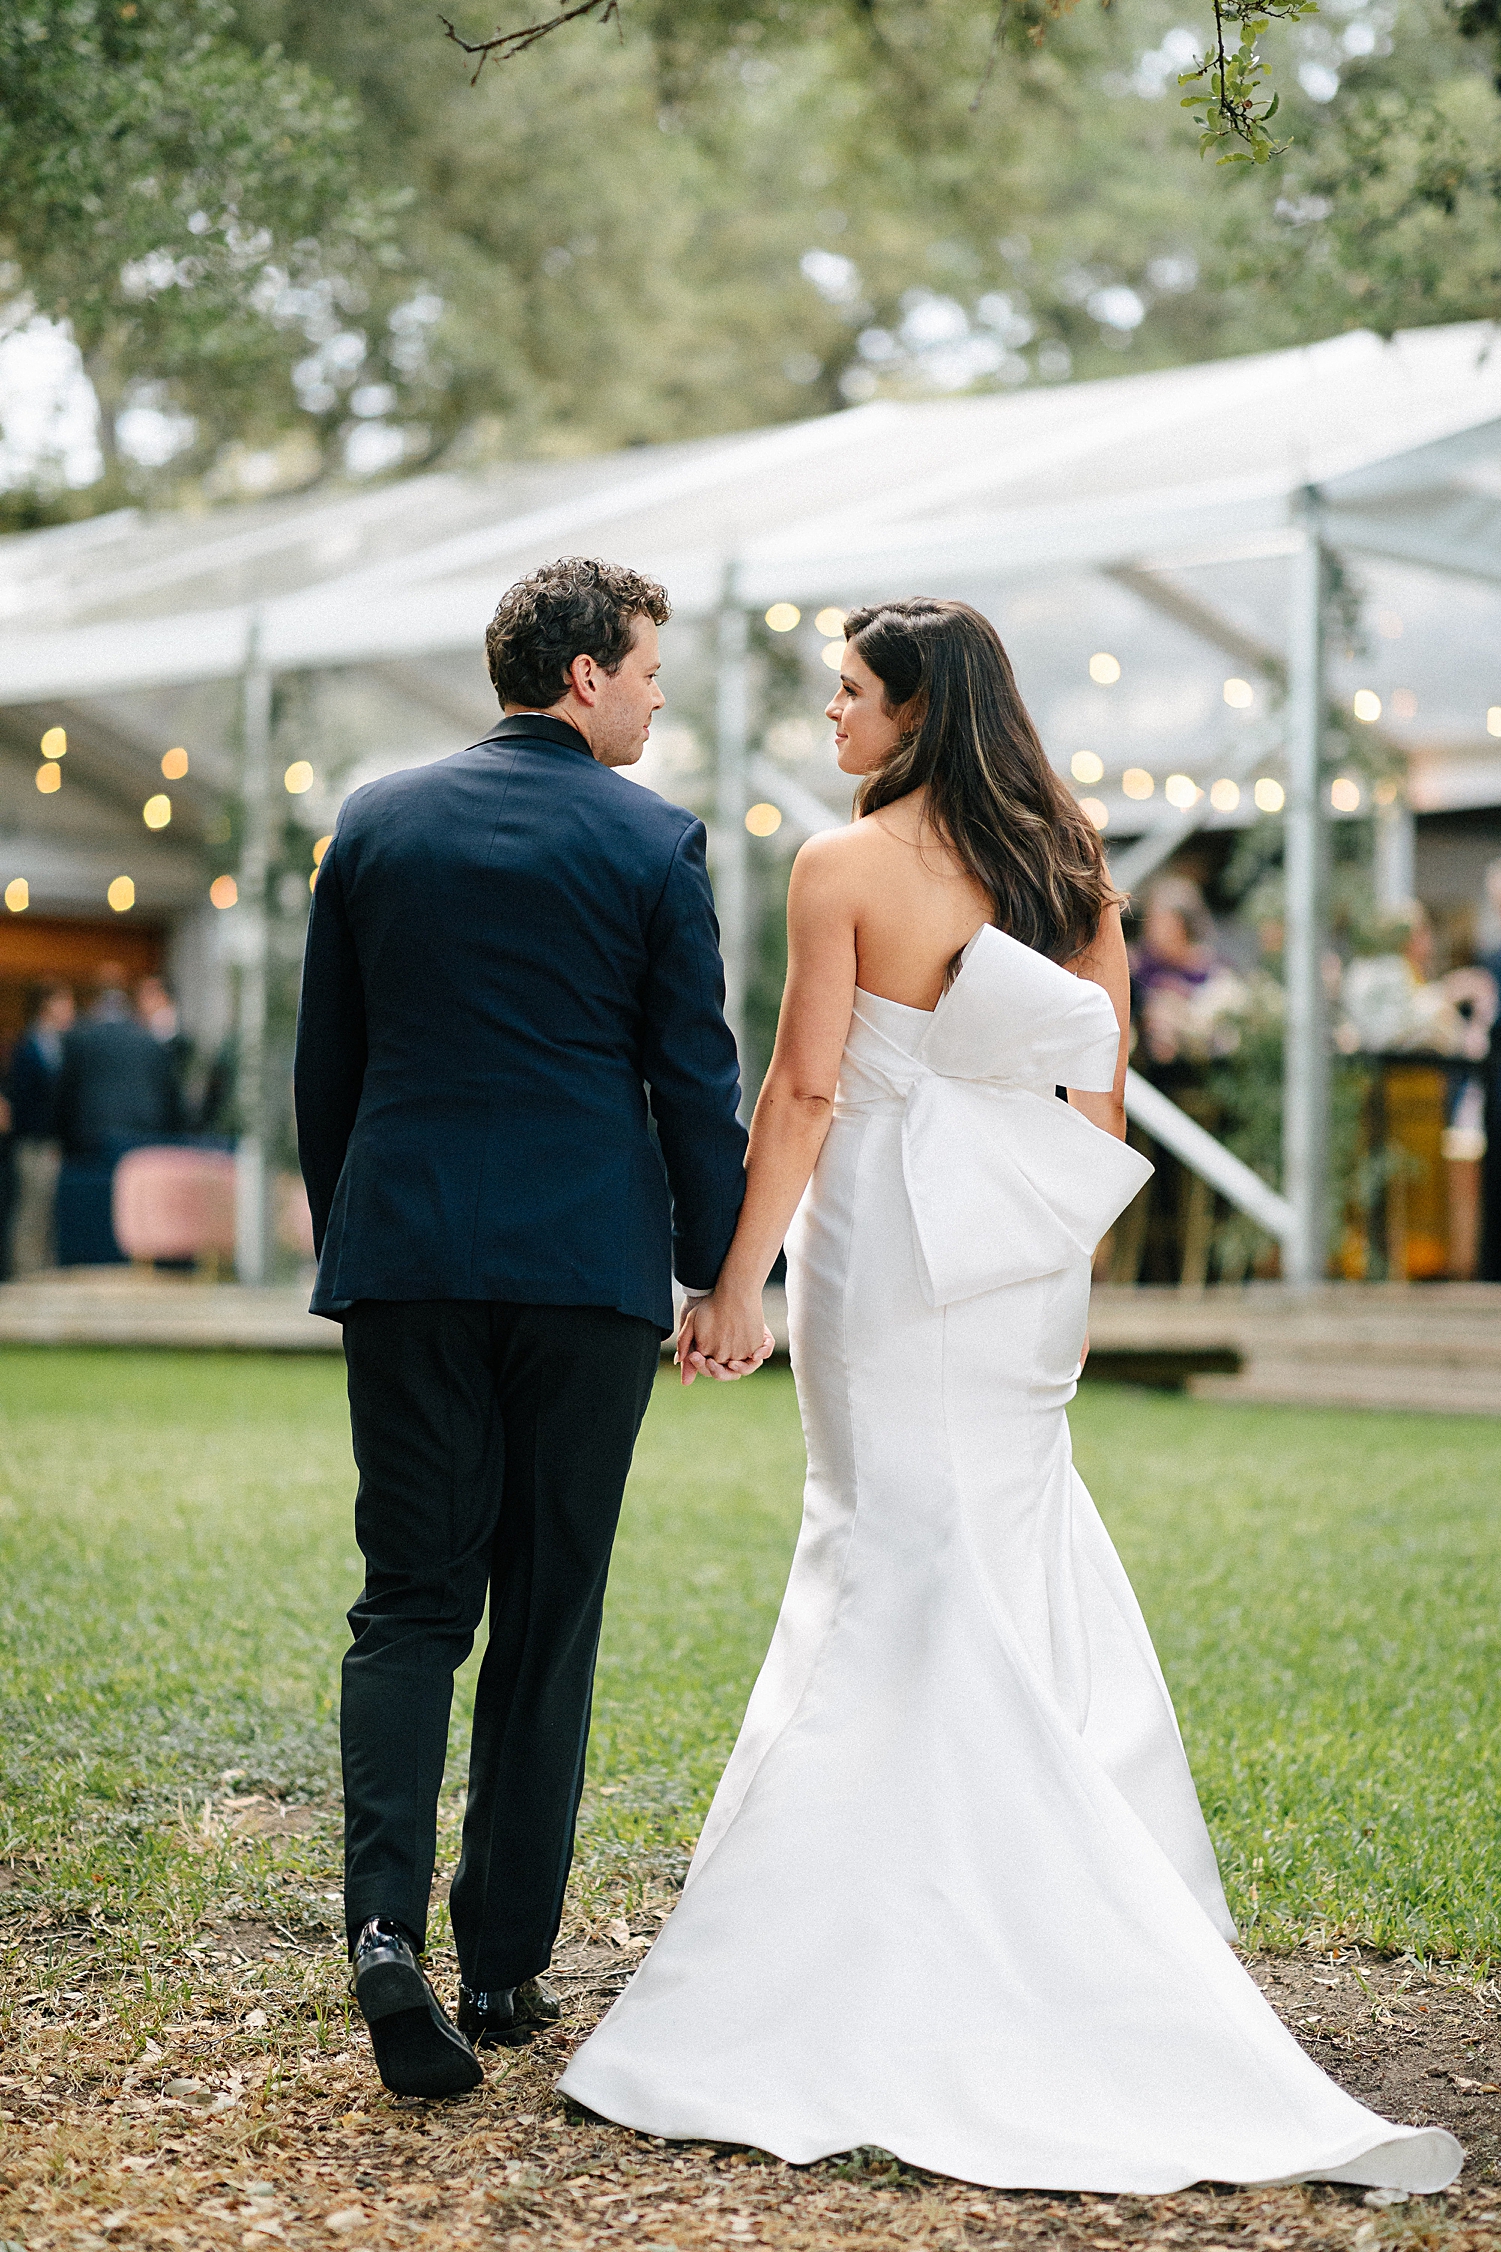 Groom in navy suit walking with bride in white strapless wedding dress